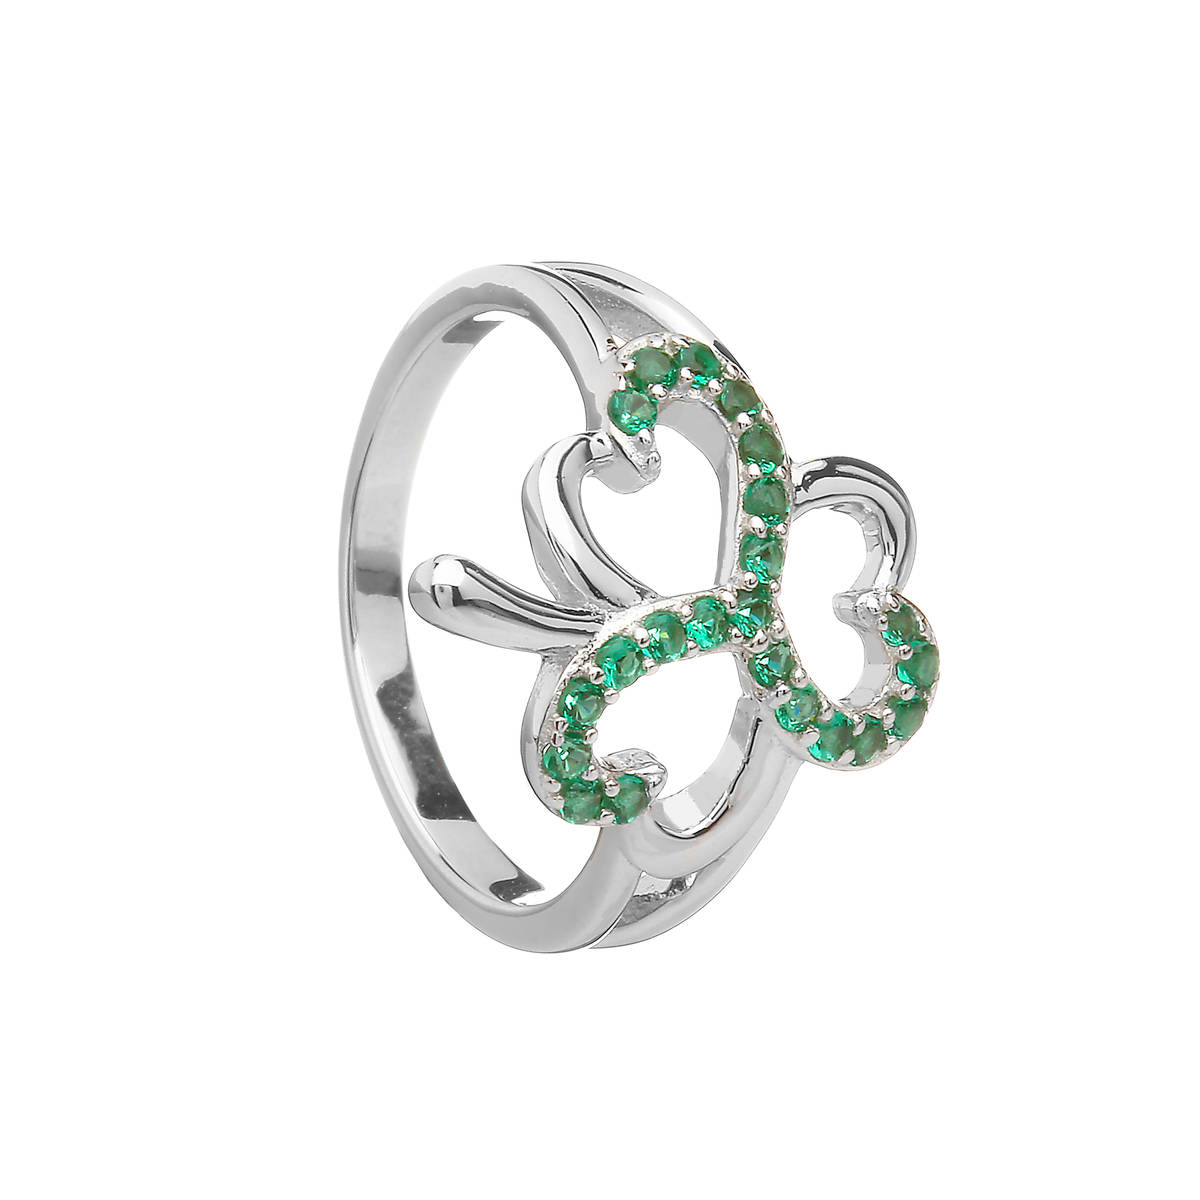 Sterling Silver Shamrock Design Ring Set With Emerald Green Cubic Zirconias